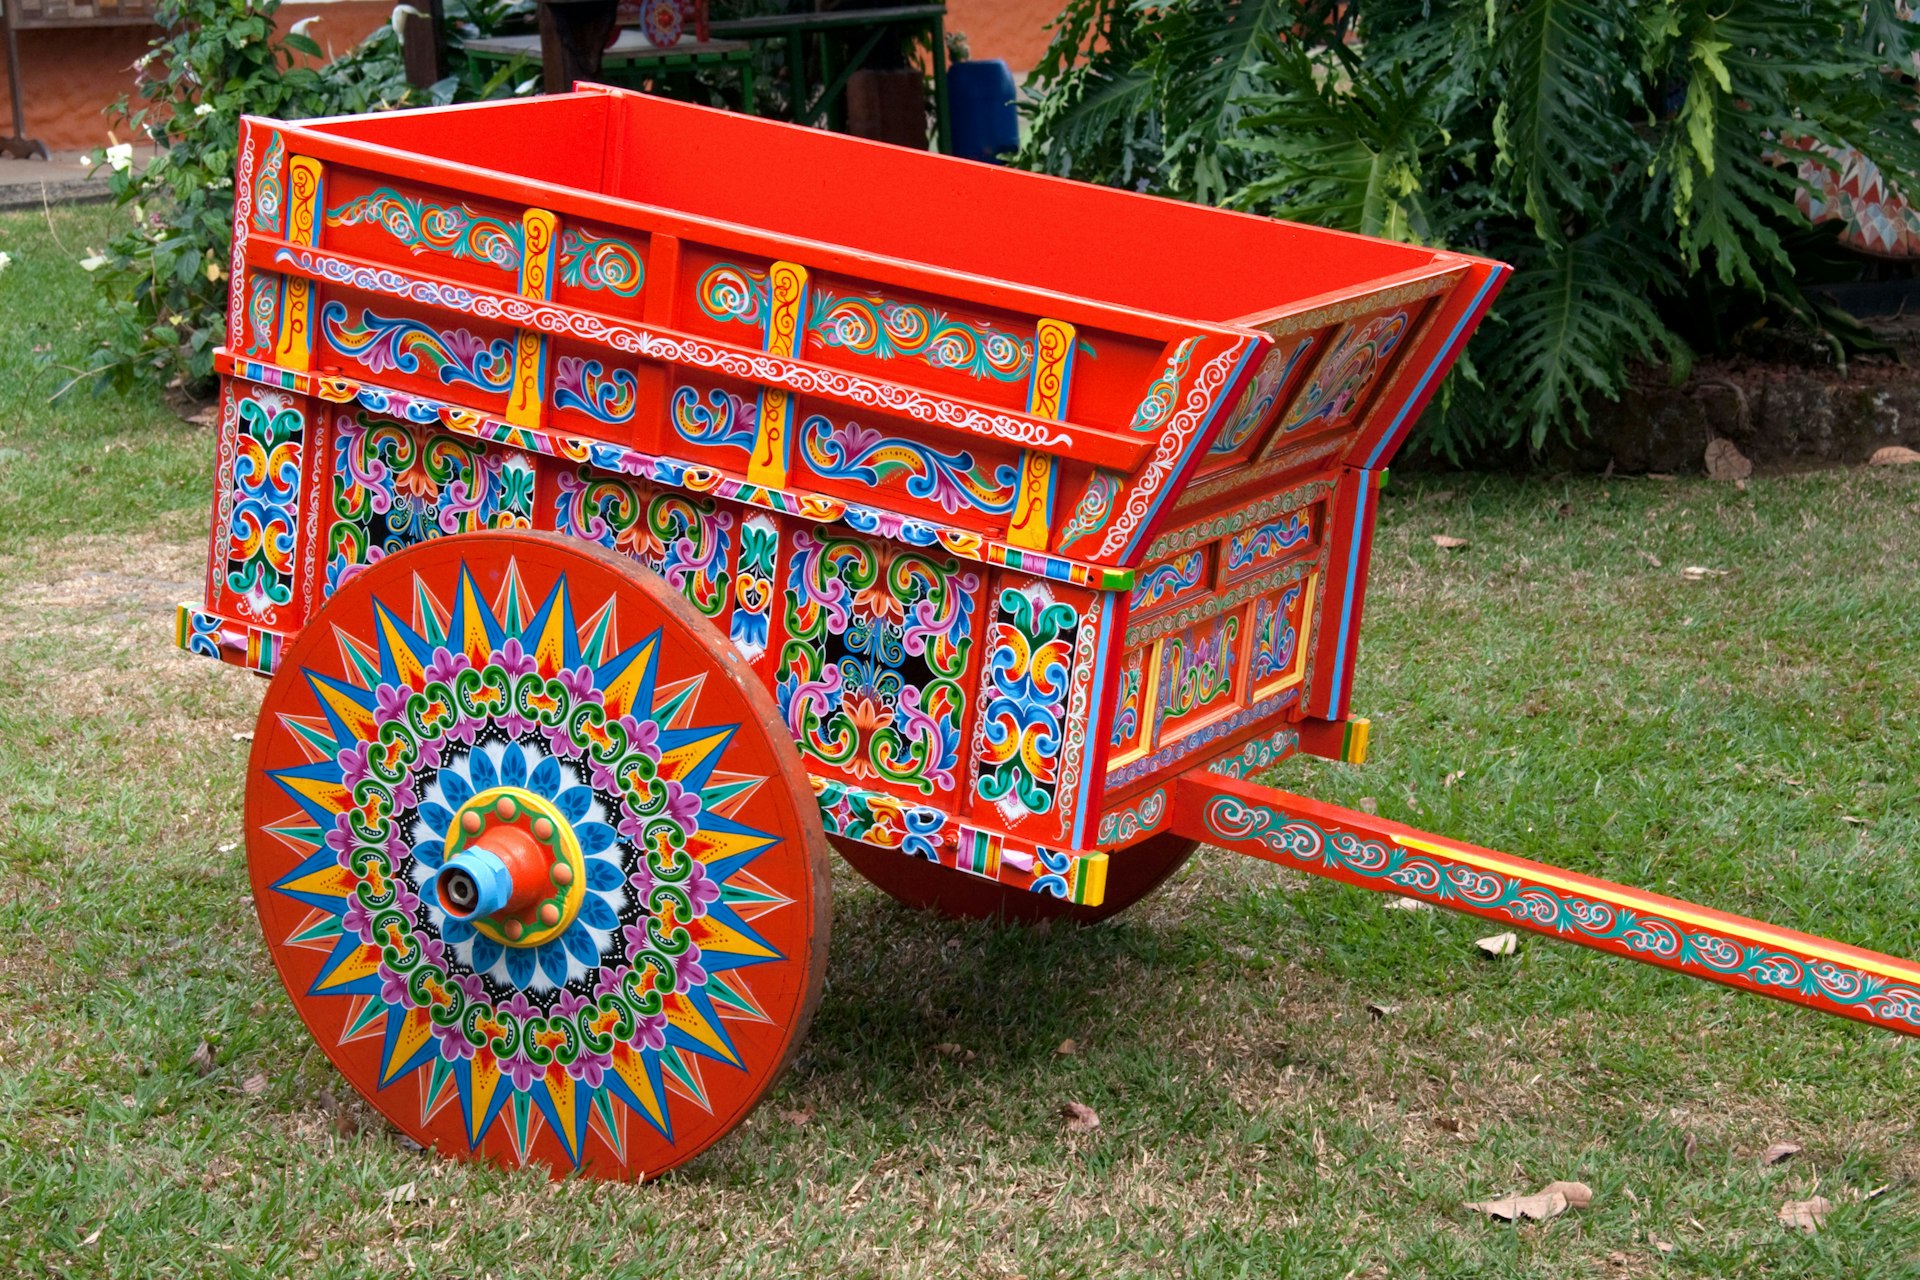 Carretas are elaborately painted oxcarts in the city of Sarchi Norte, Costa Rica.